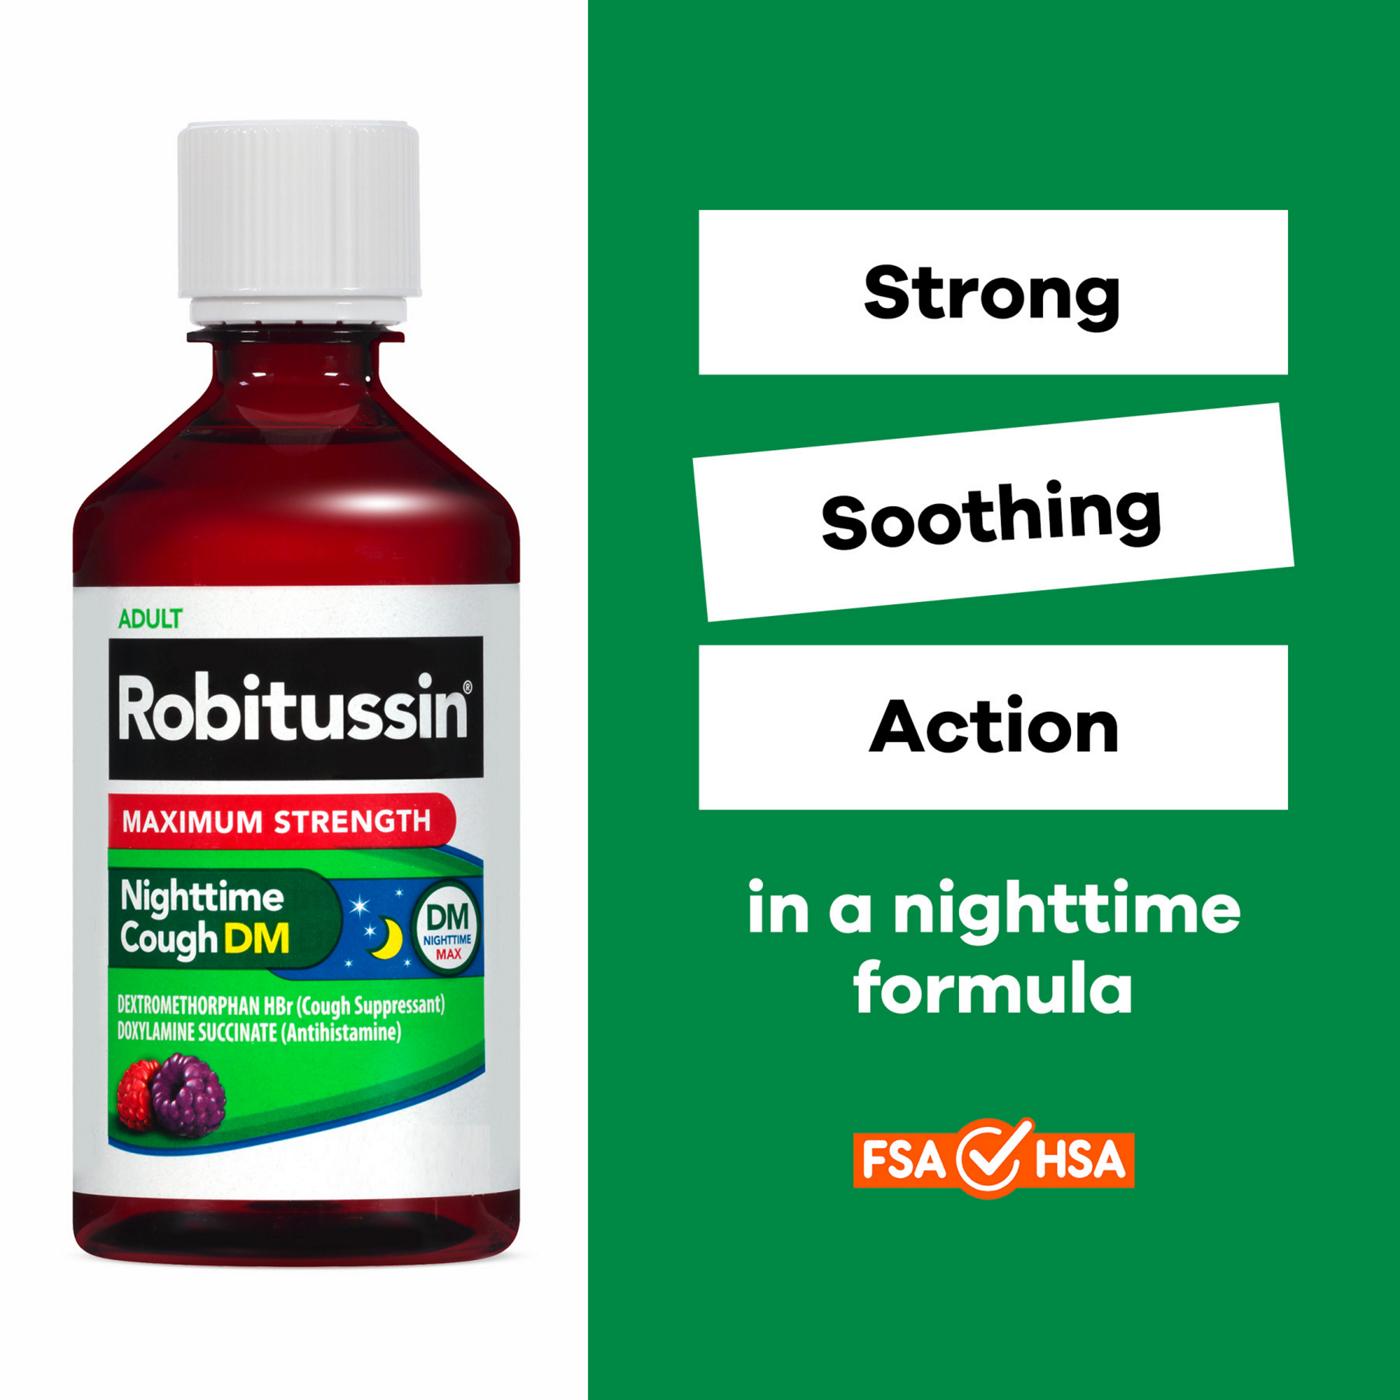 Robitussin Max Strength Blue Raspberry Nighttime Cough DM Liquid; image 2 of 6